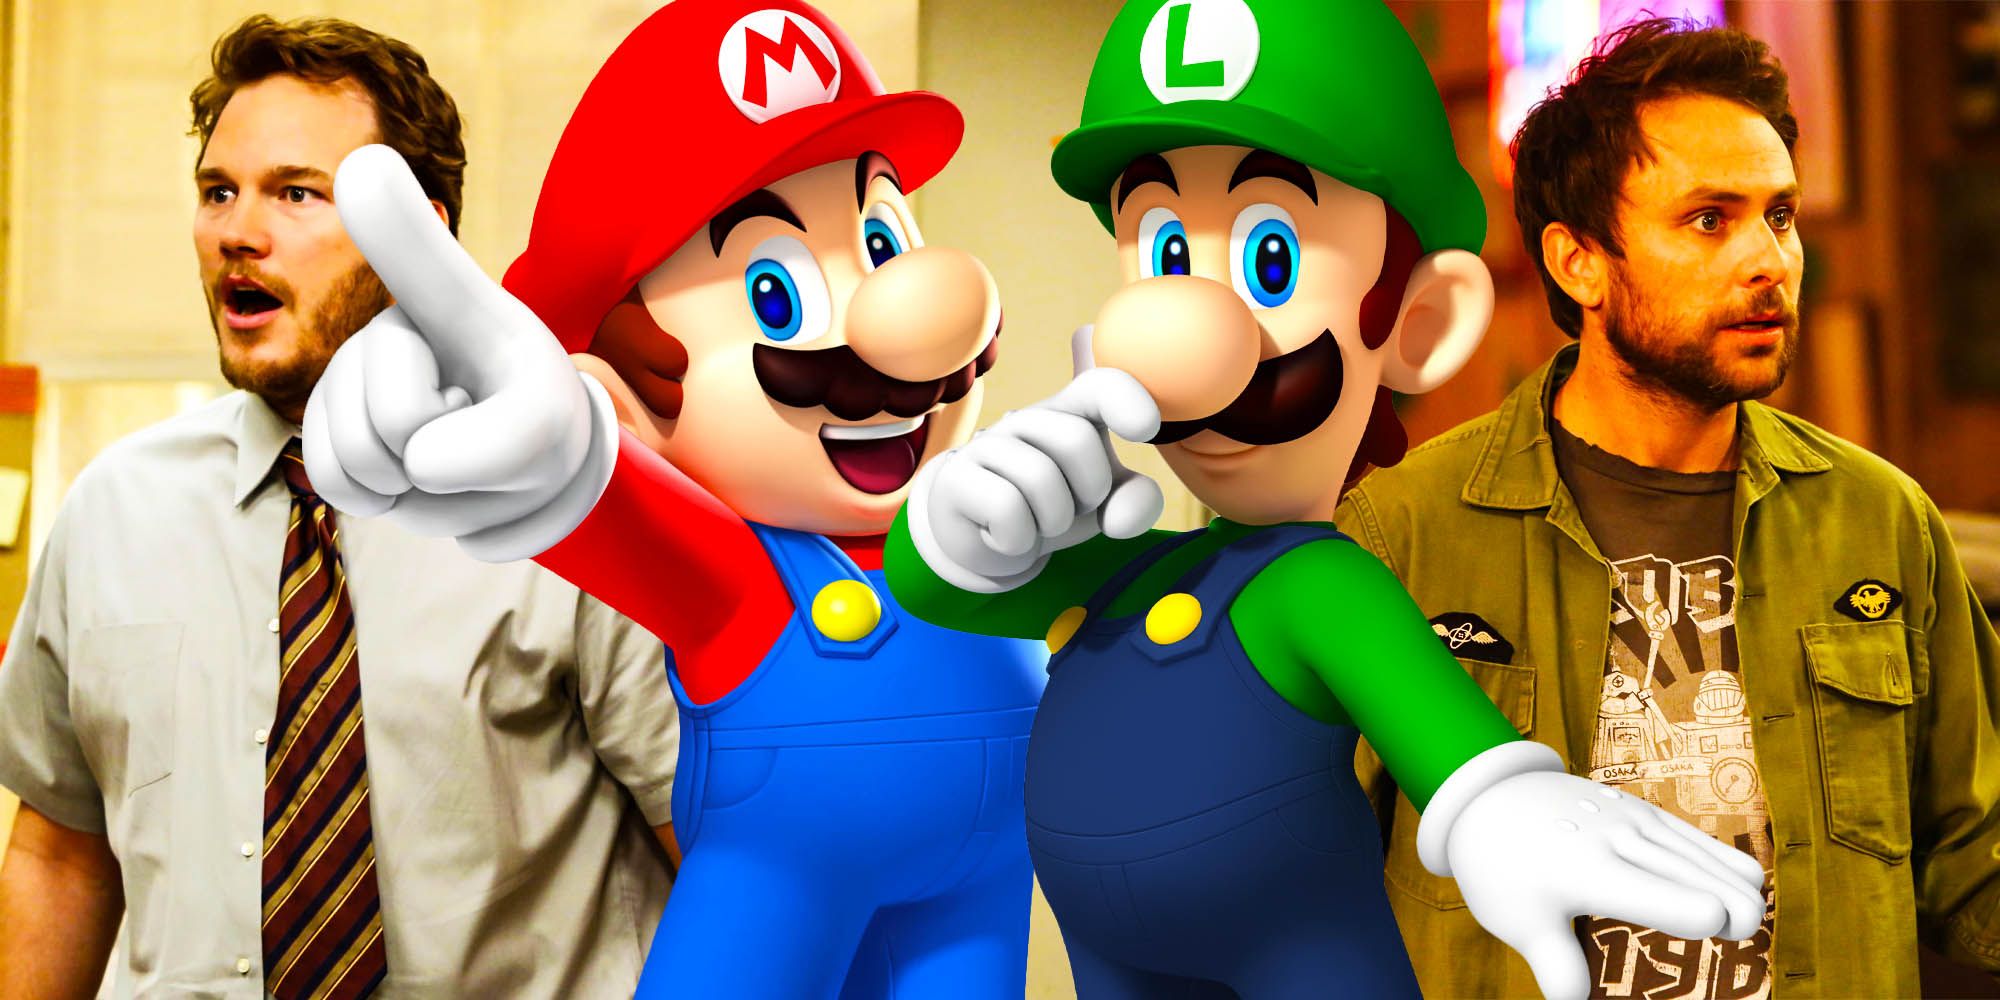 A blended image features actors Chris Pratt and Charlie Day behind the images of Super Mario Bros. Mario and Luigi.